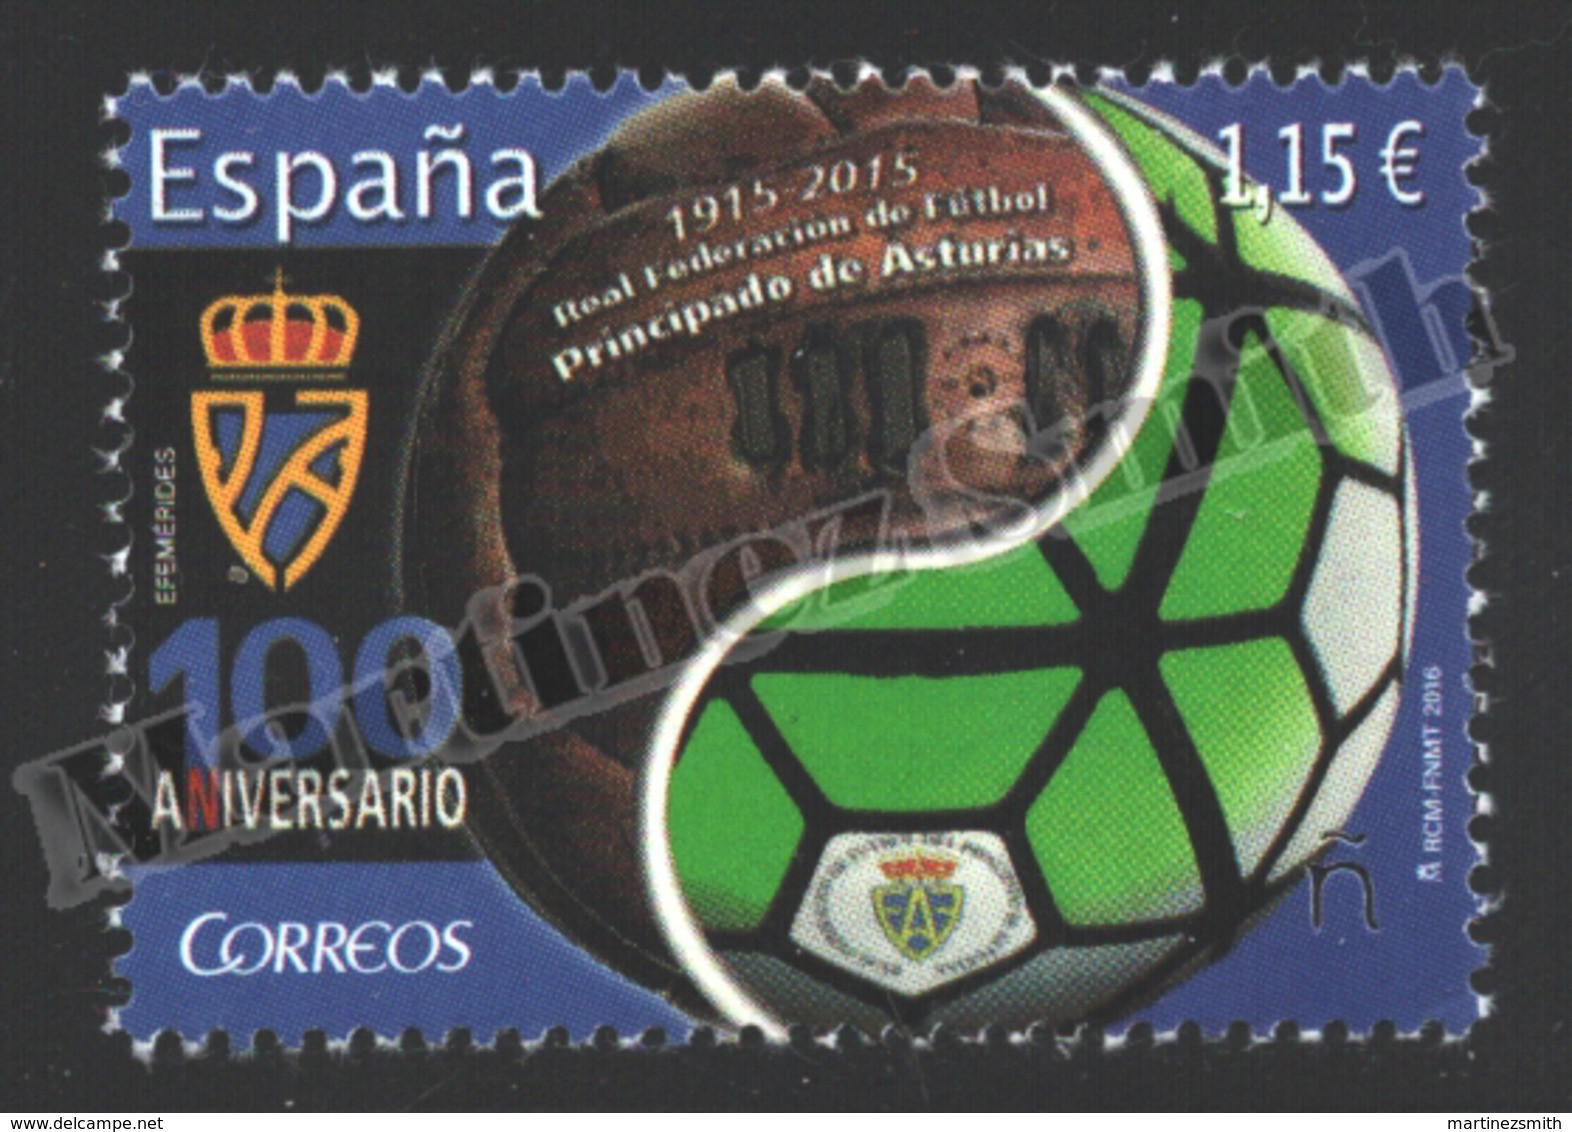 Spain - Espagne 2016 Yvert 4774, Centenary Of The Royal Football Federation Of The Principality Of Asturias - MNH - Unused Stamps